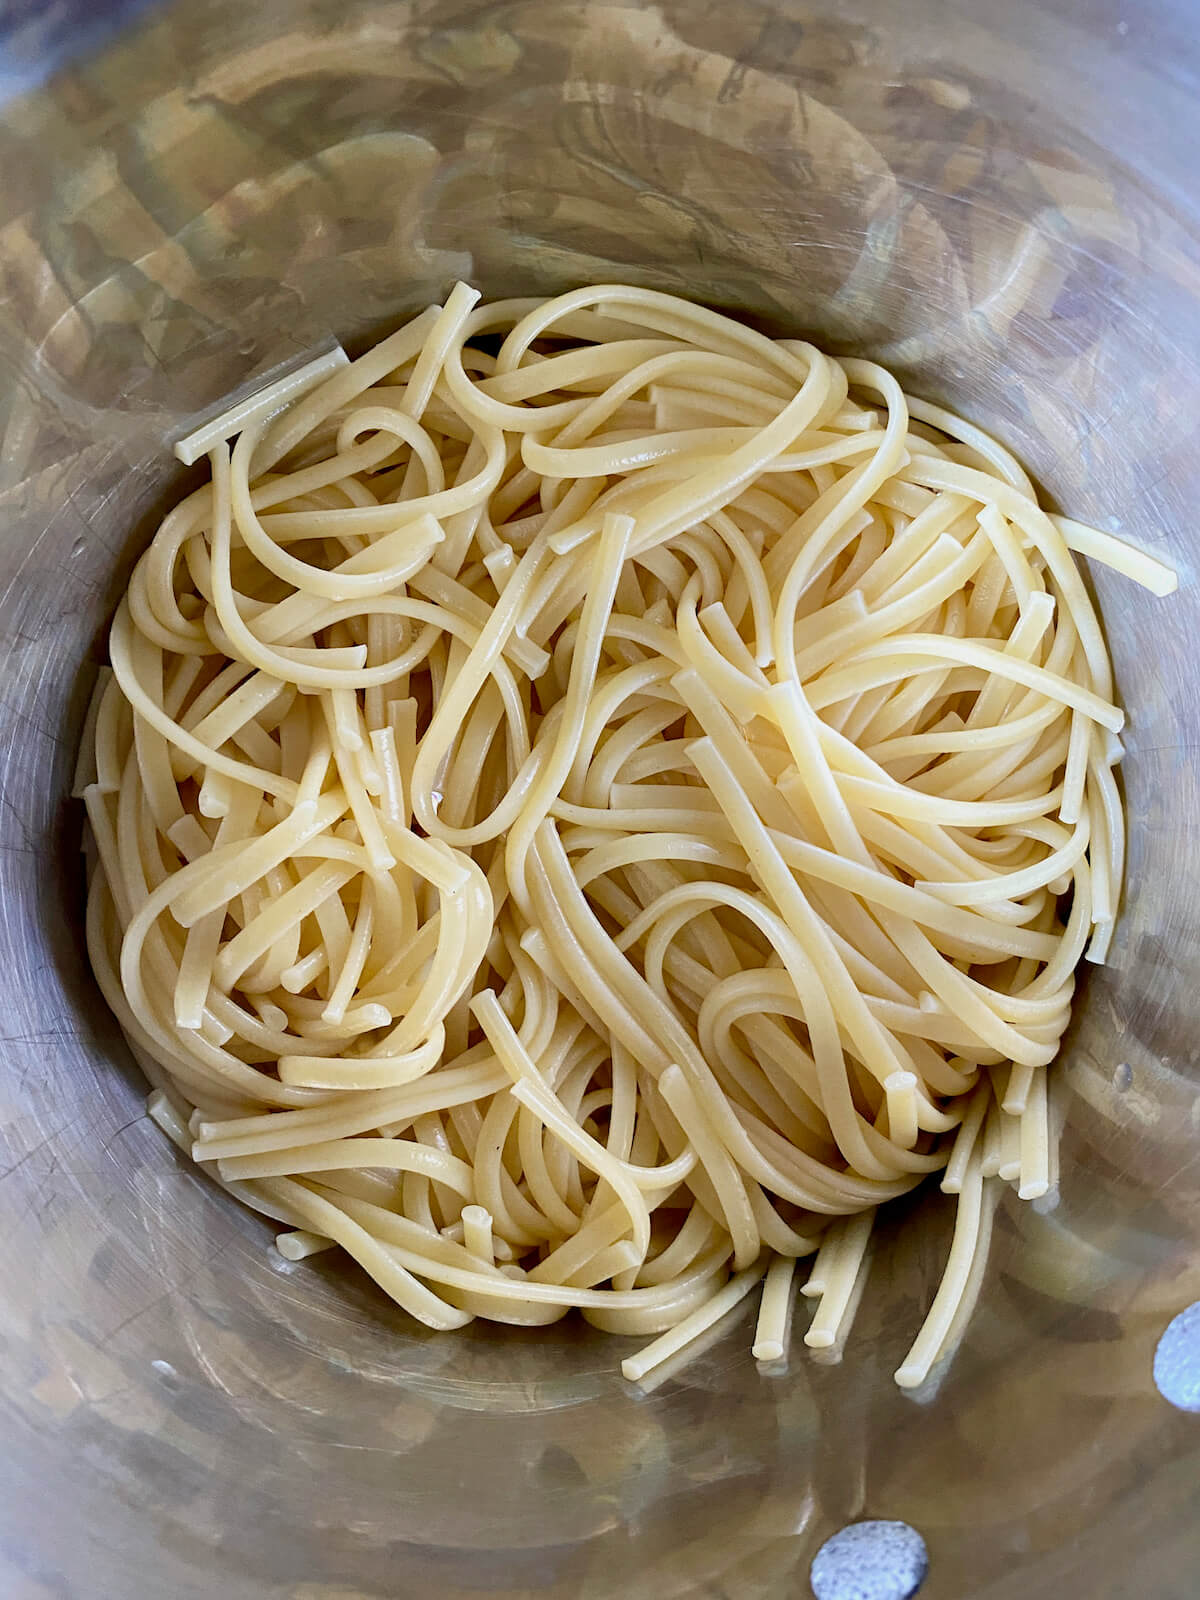 Cooked linguine in a stainless steel pot.